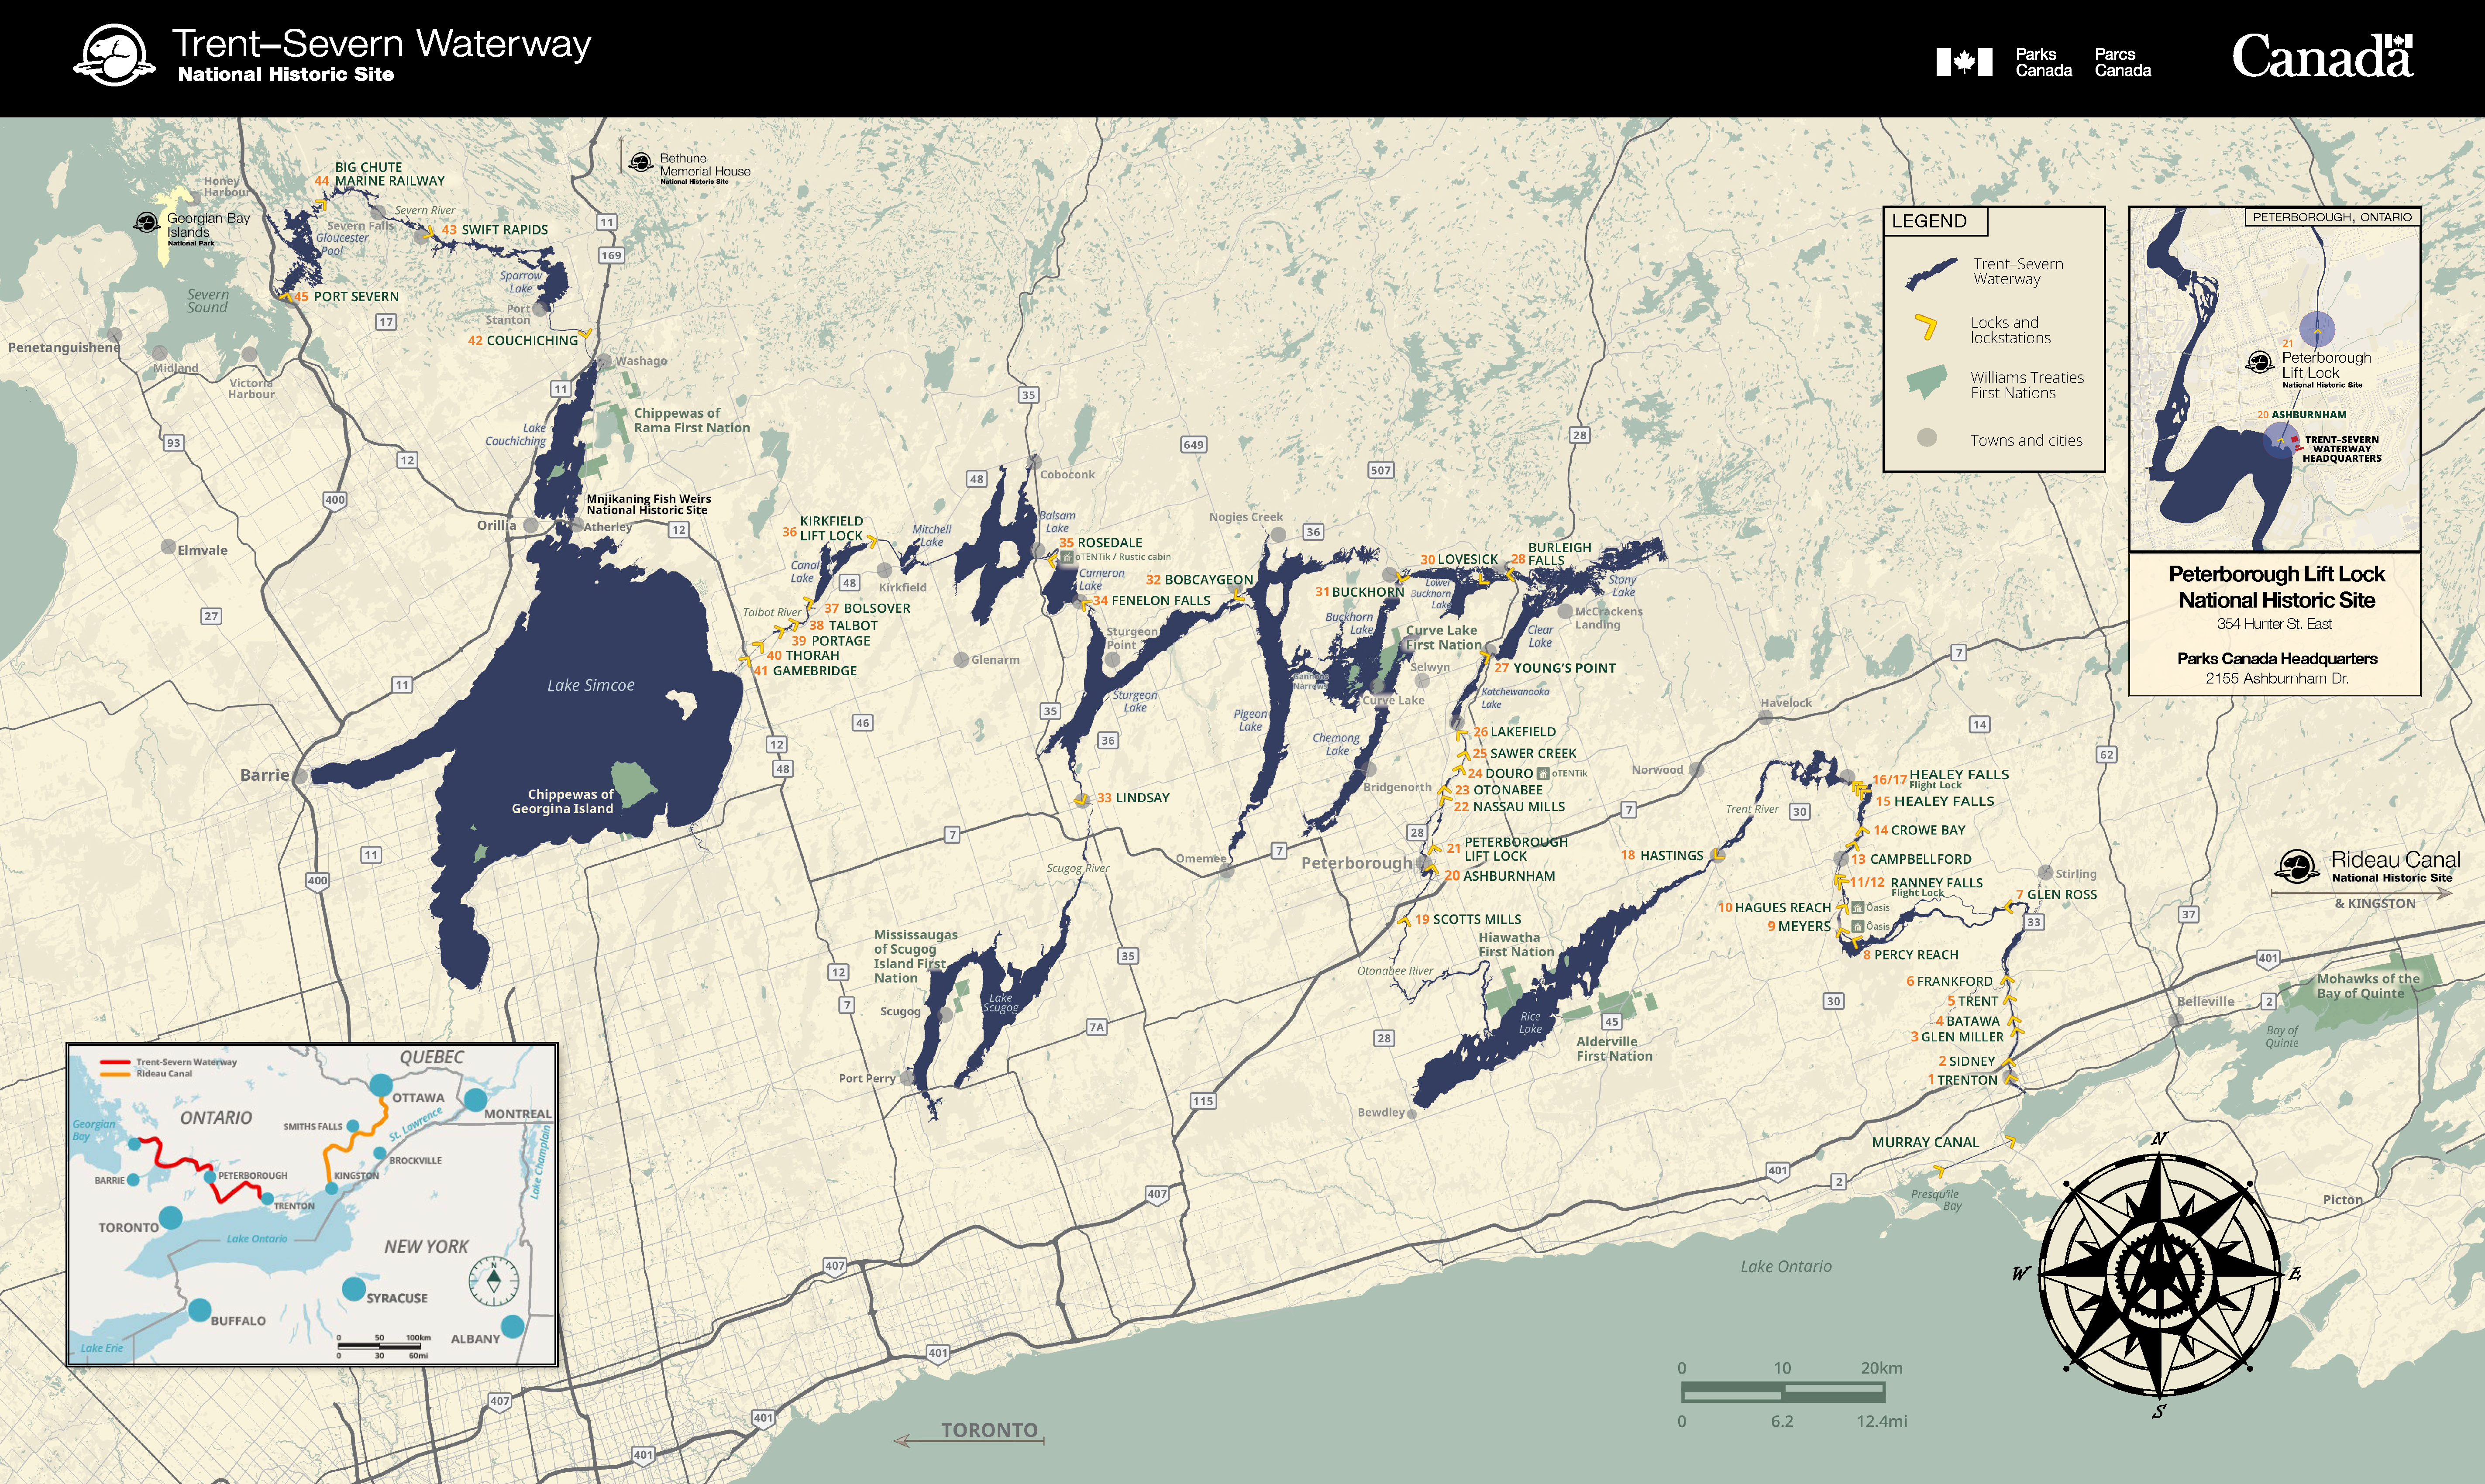 Colour map of Trent—Severn waterway showing locations of locks and lockstations.